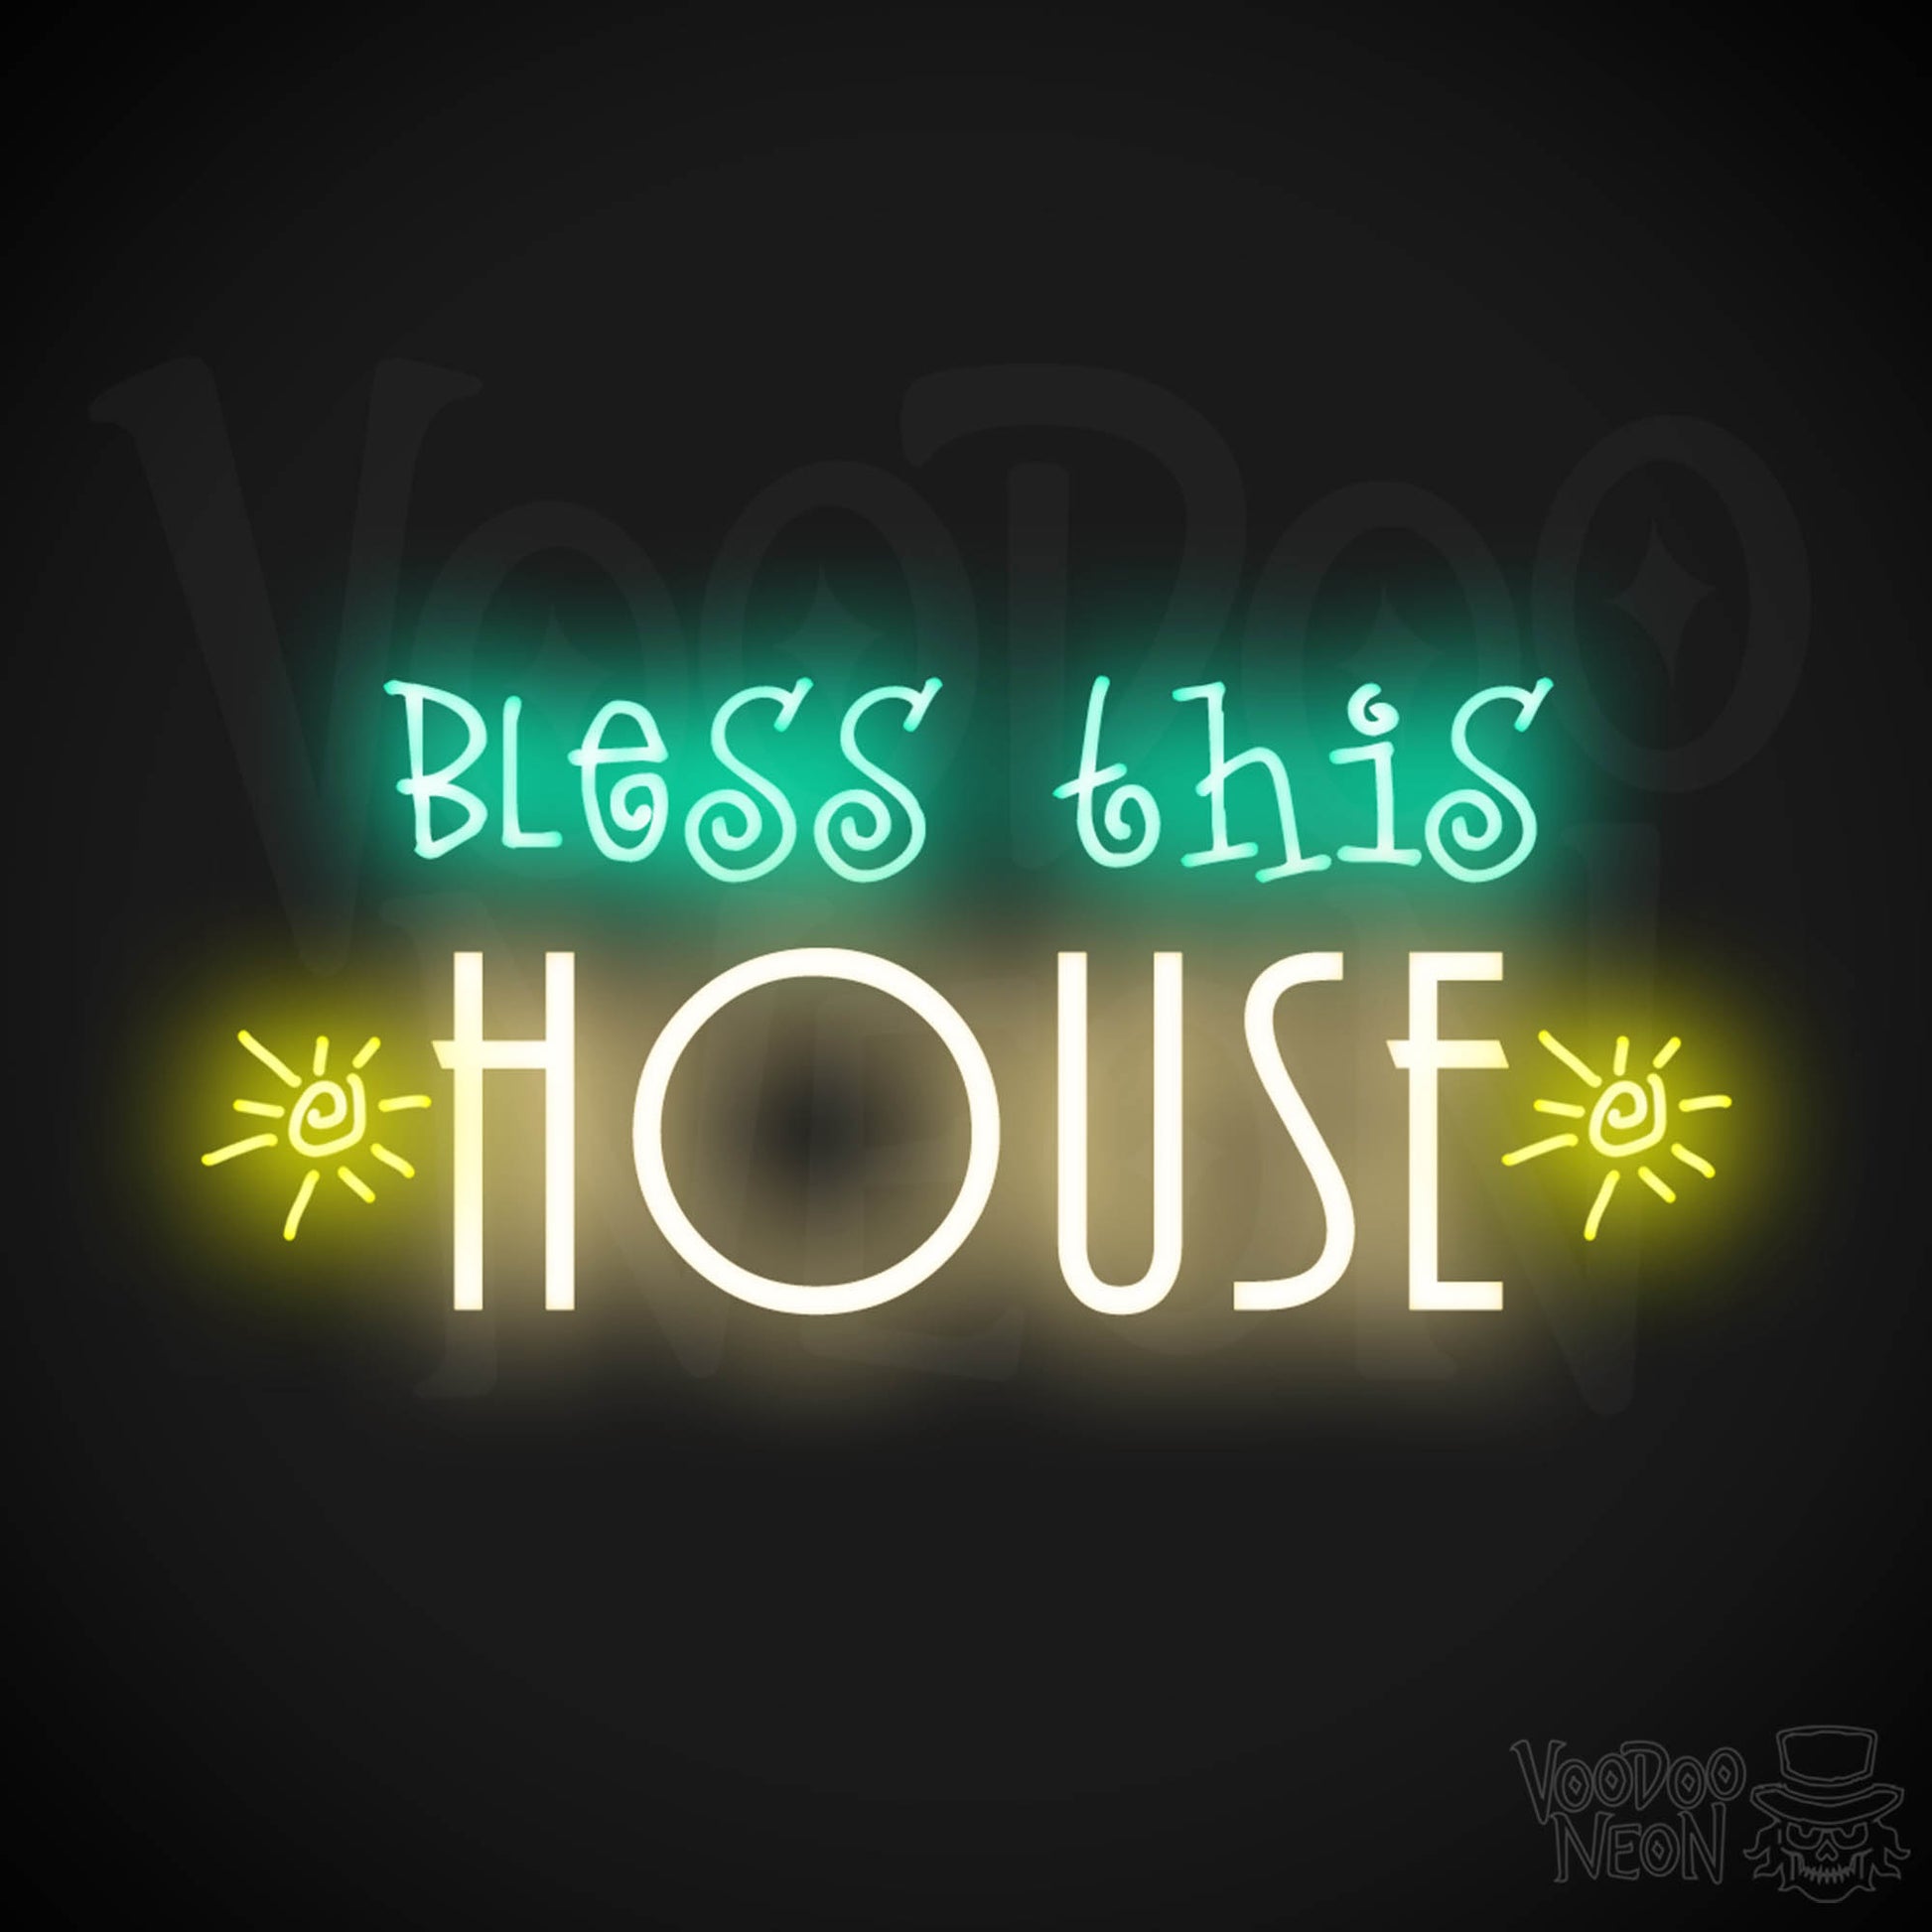 Bless This House Neon Sign - Neon Bless This House Sign - LED Light Up Sign - Color Multi-Color